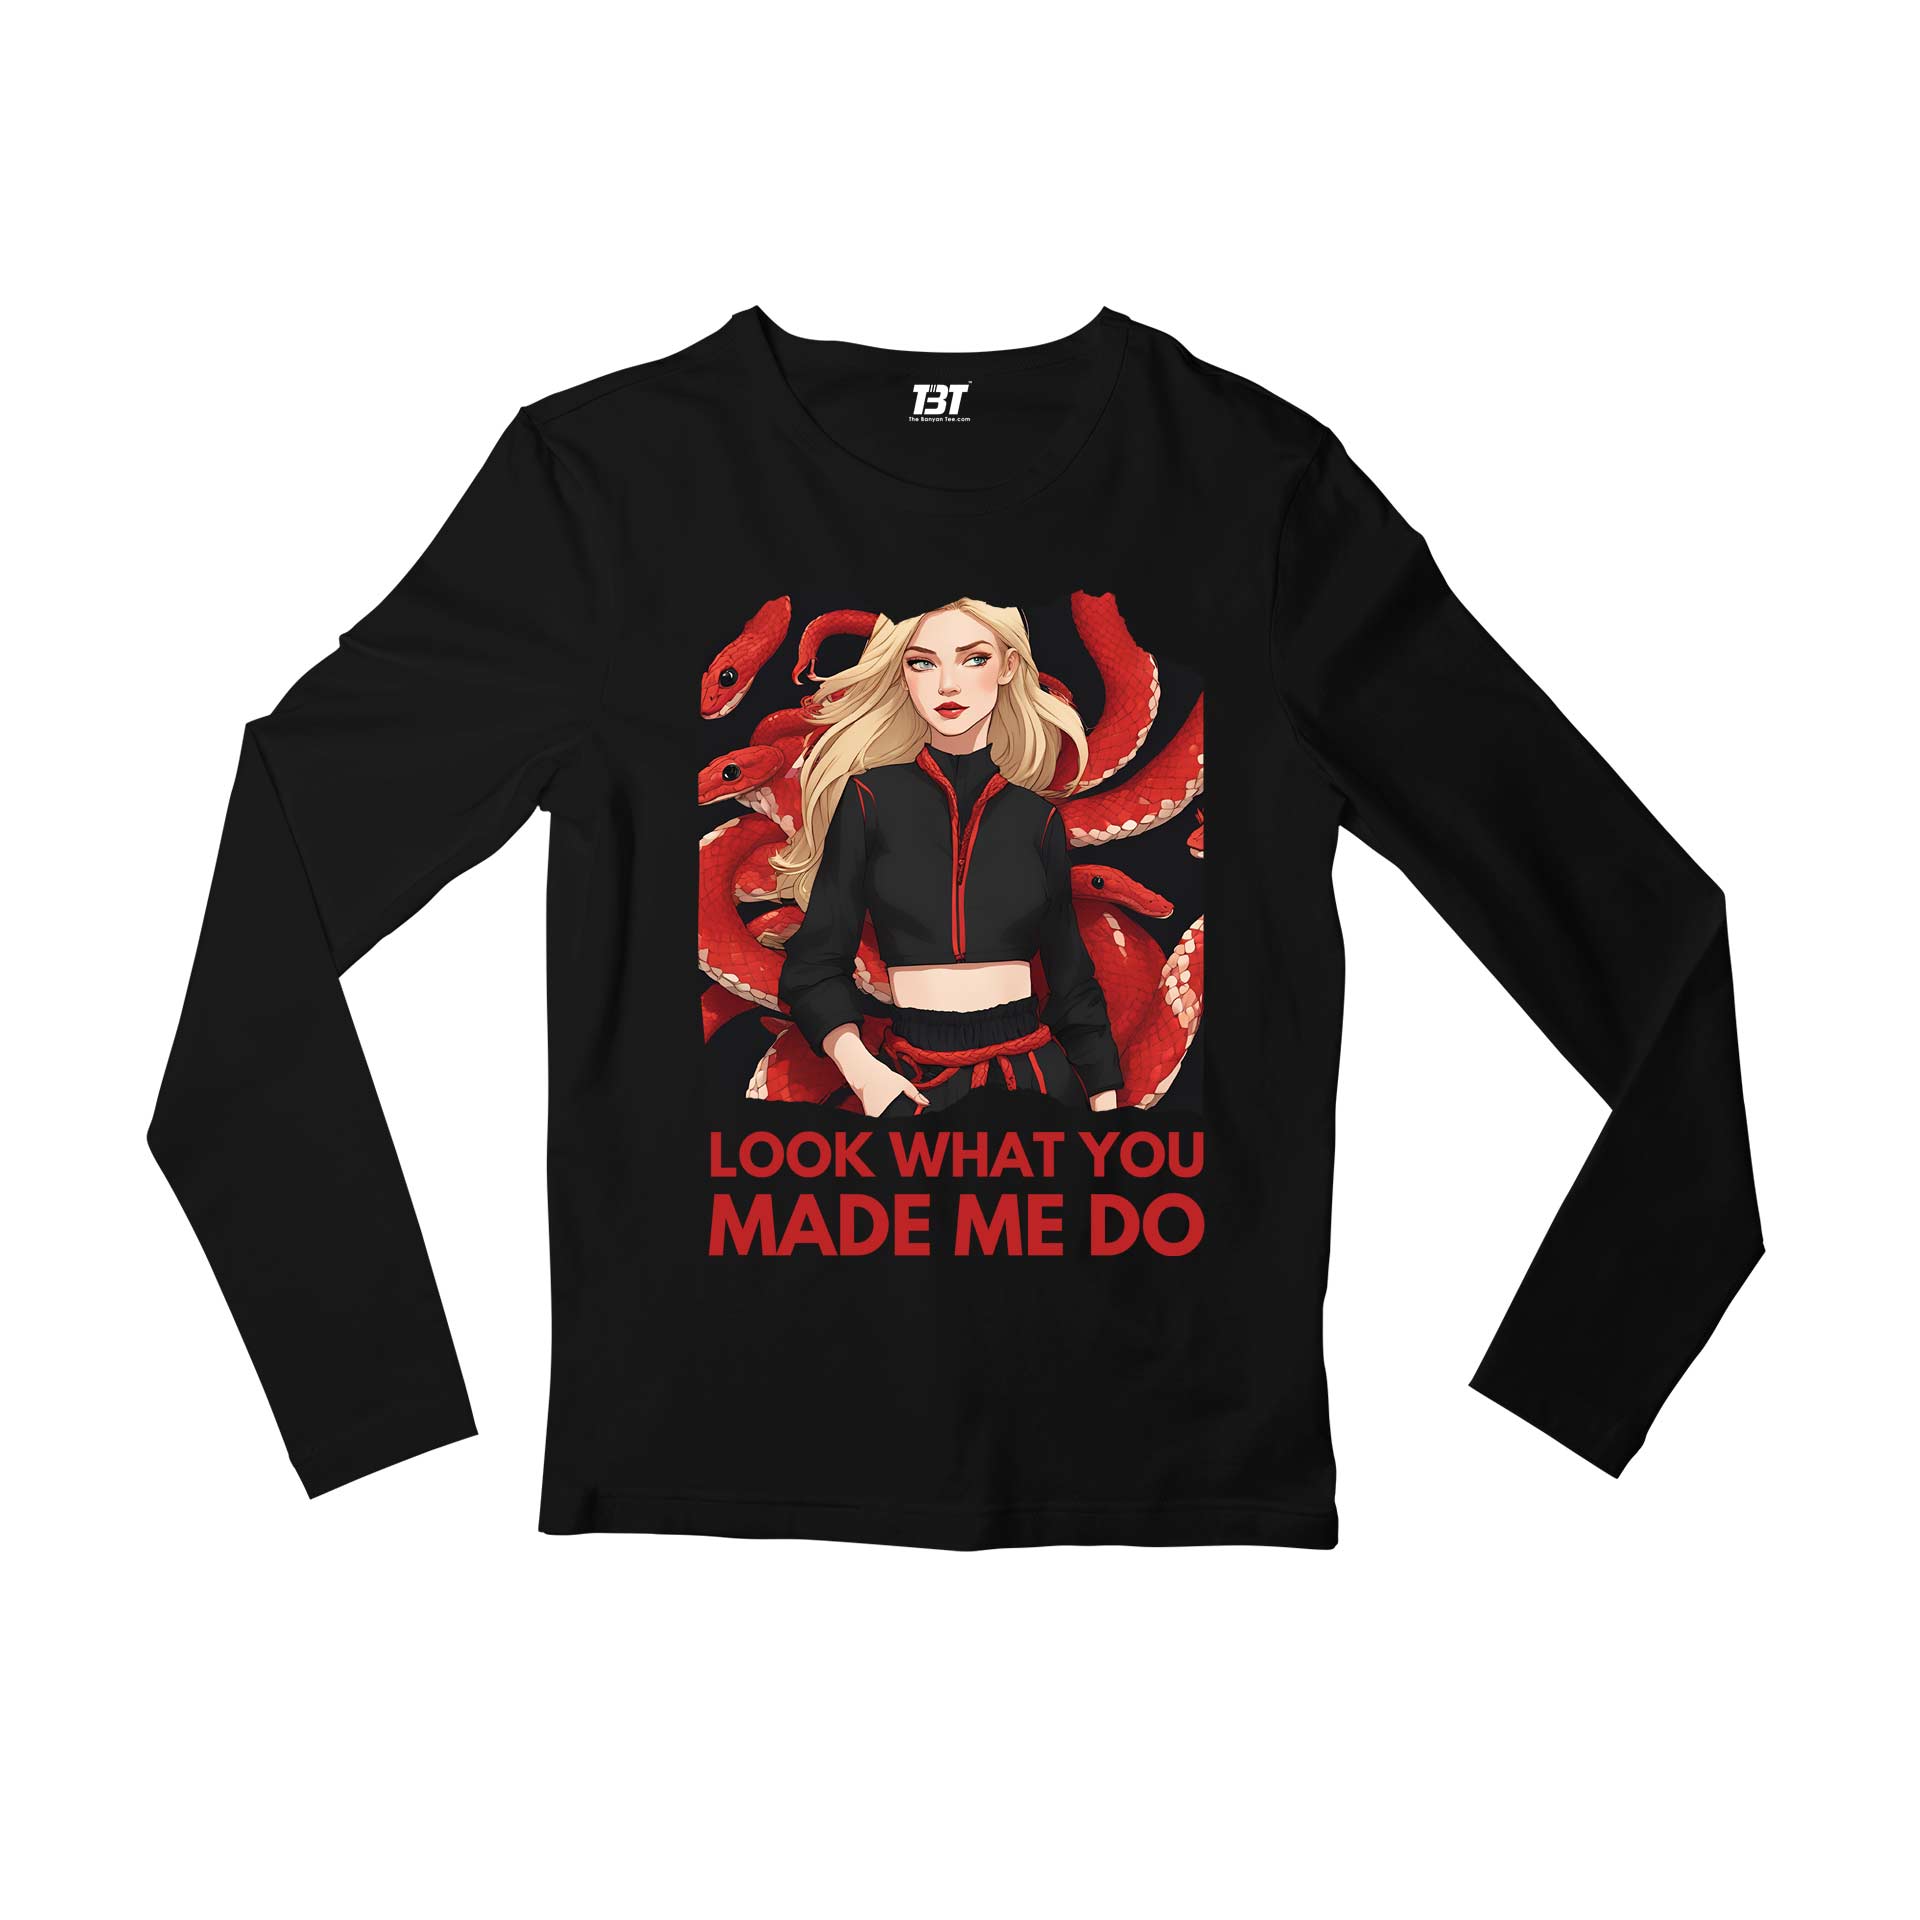 taylor swift look what you made me do full sleeves long sleeves music band buy online india the banyan tee tbt men women girls boys unisex black